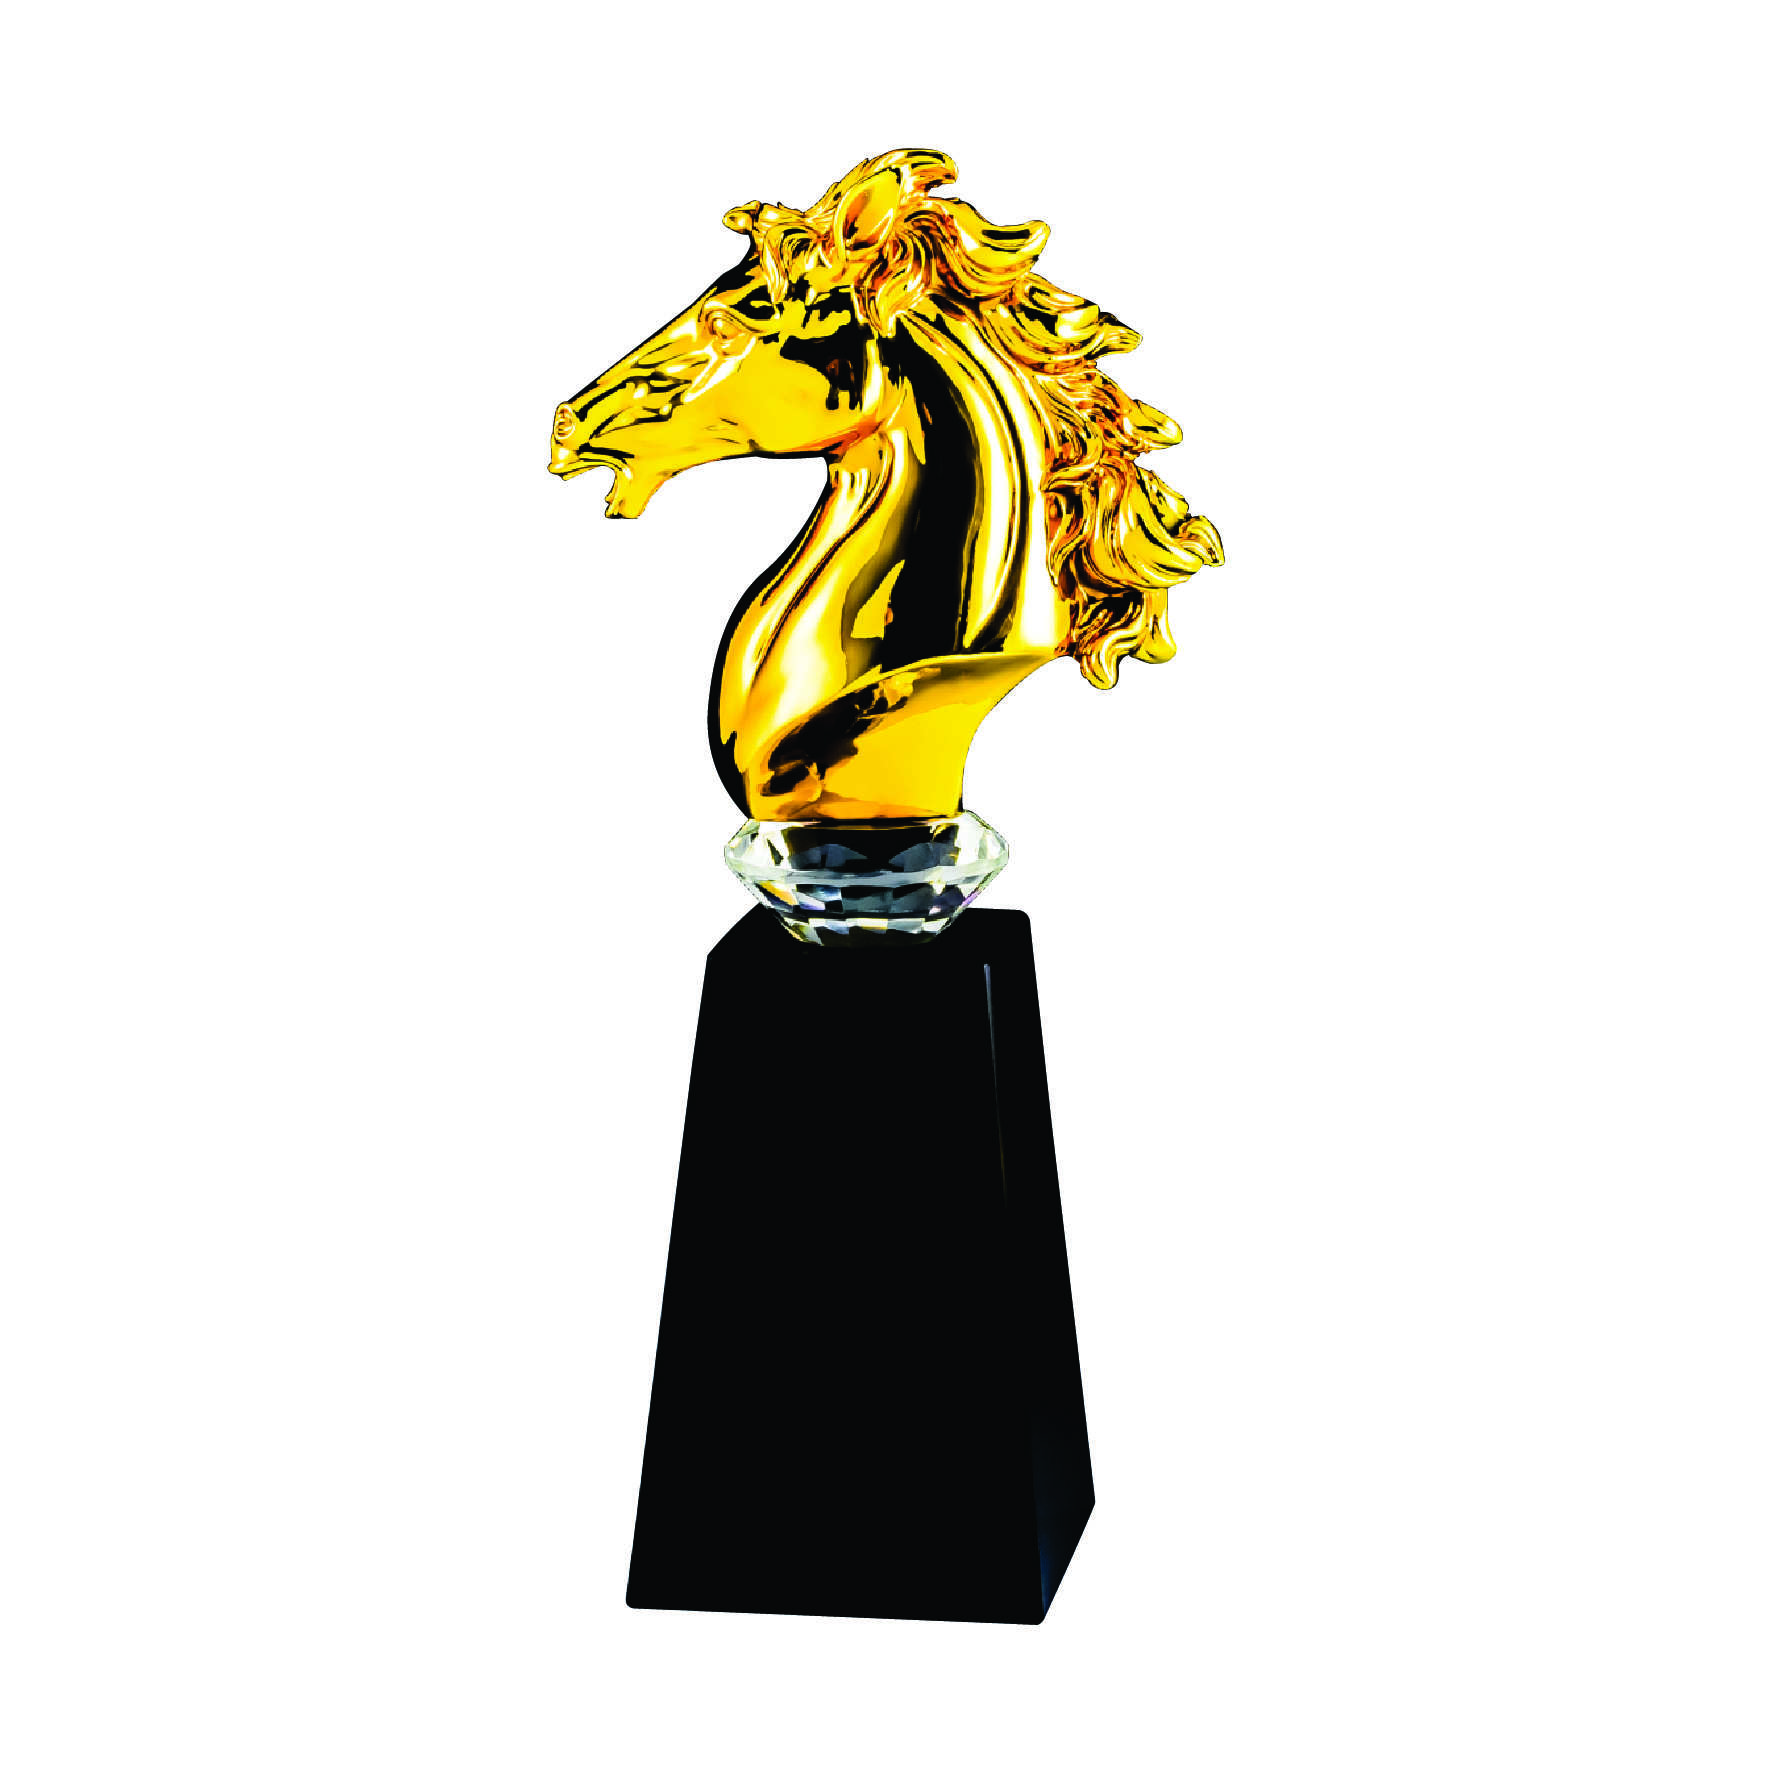 Exclusive Golden Horse Crystal Trophy at Clazz Trophy Malaysia | Trusted Trophy Supplier Malaysia